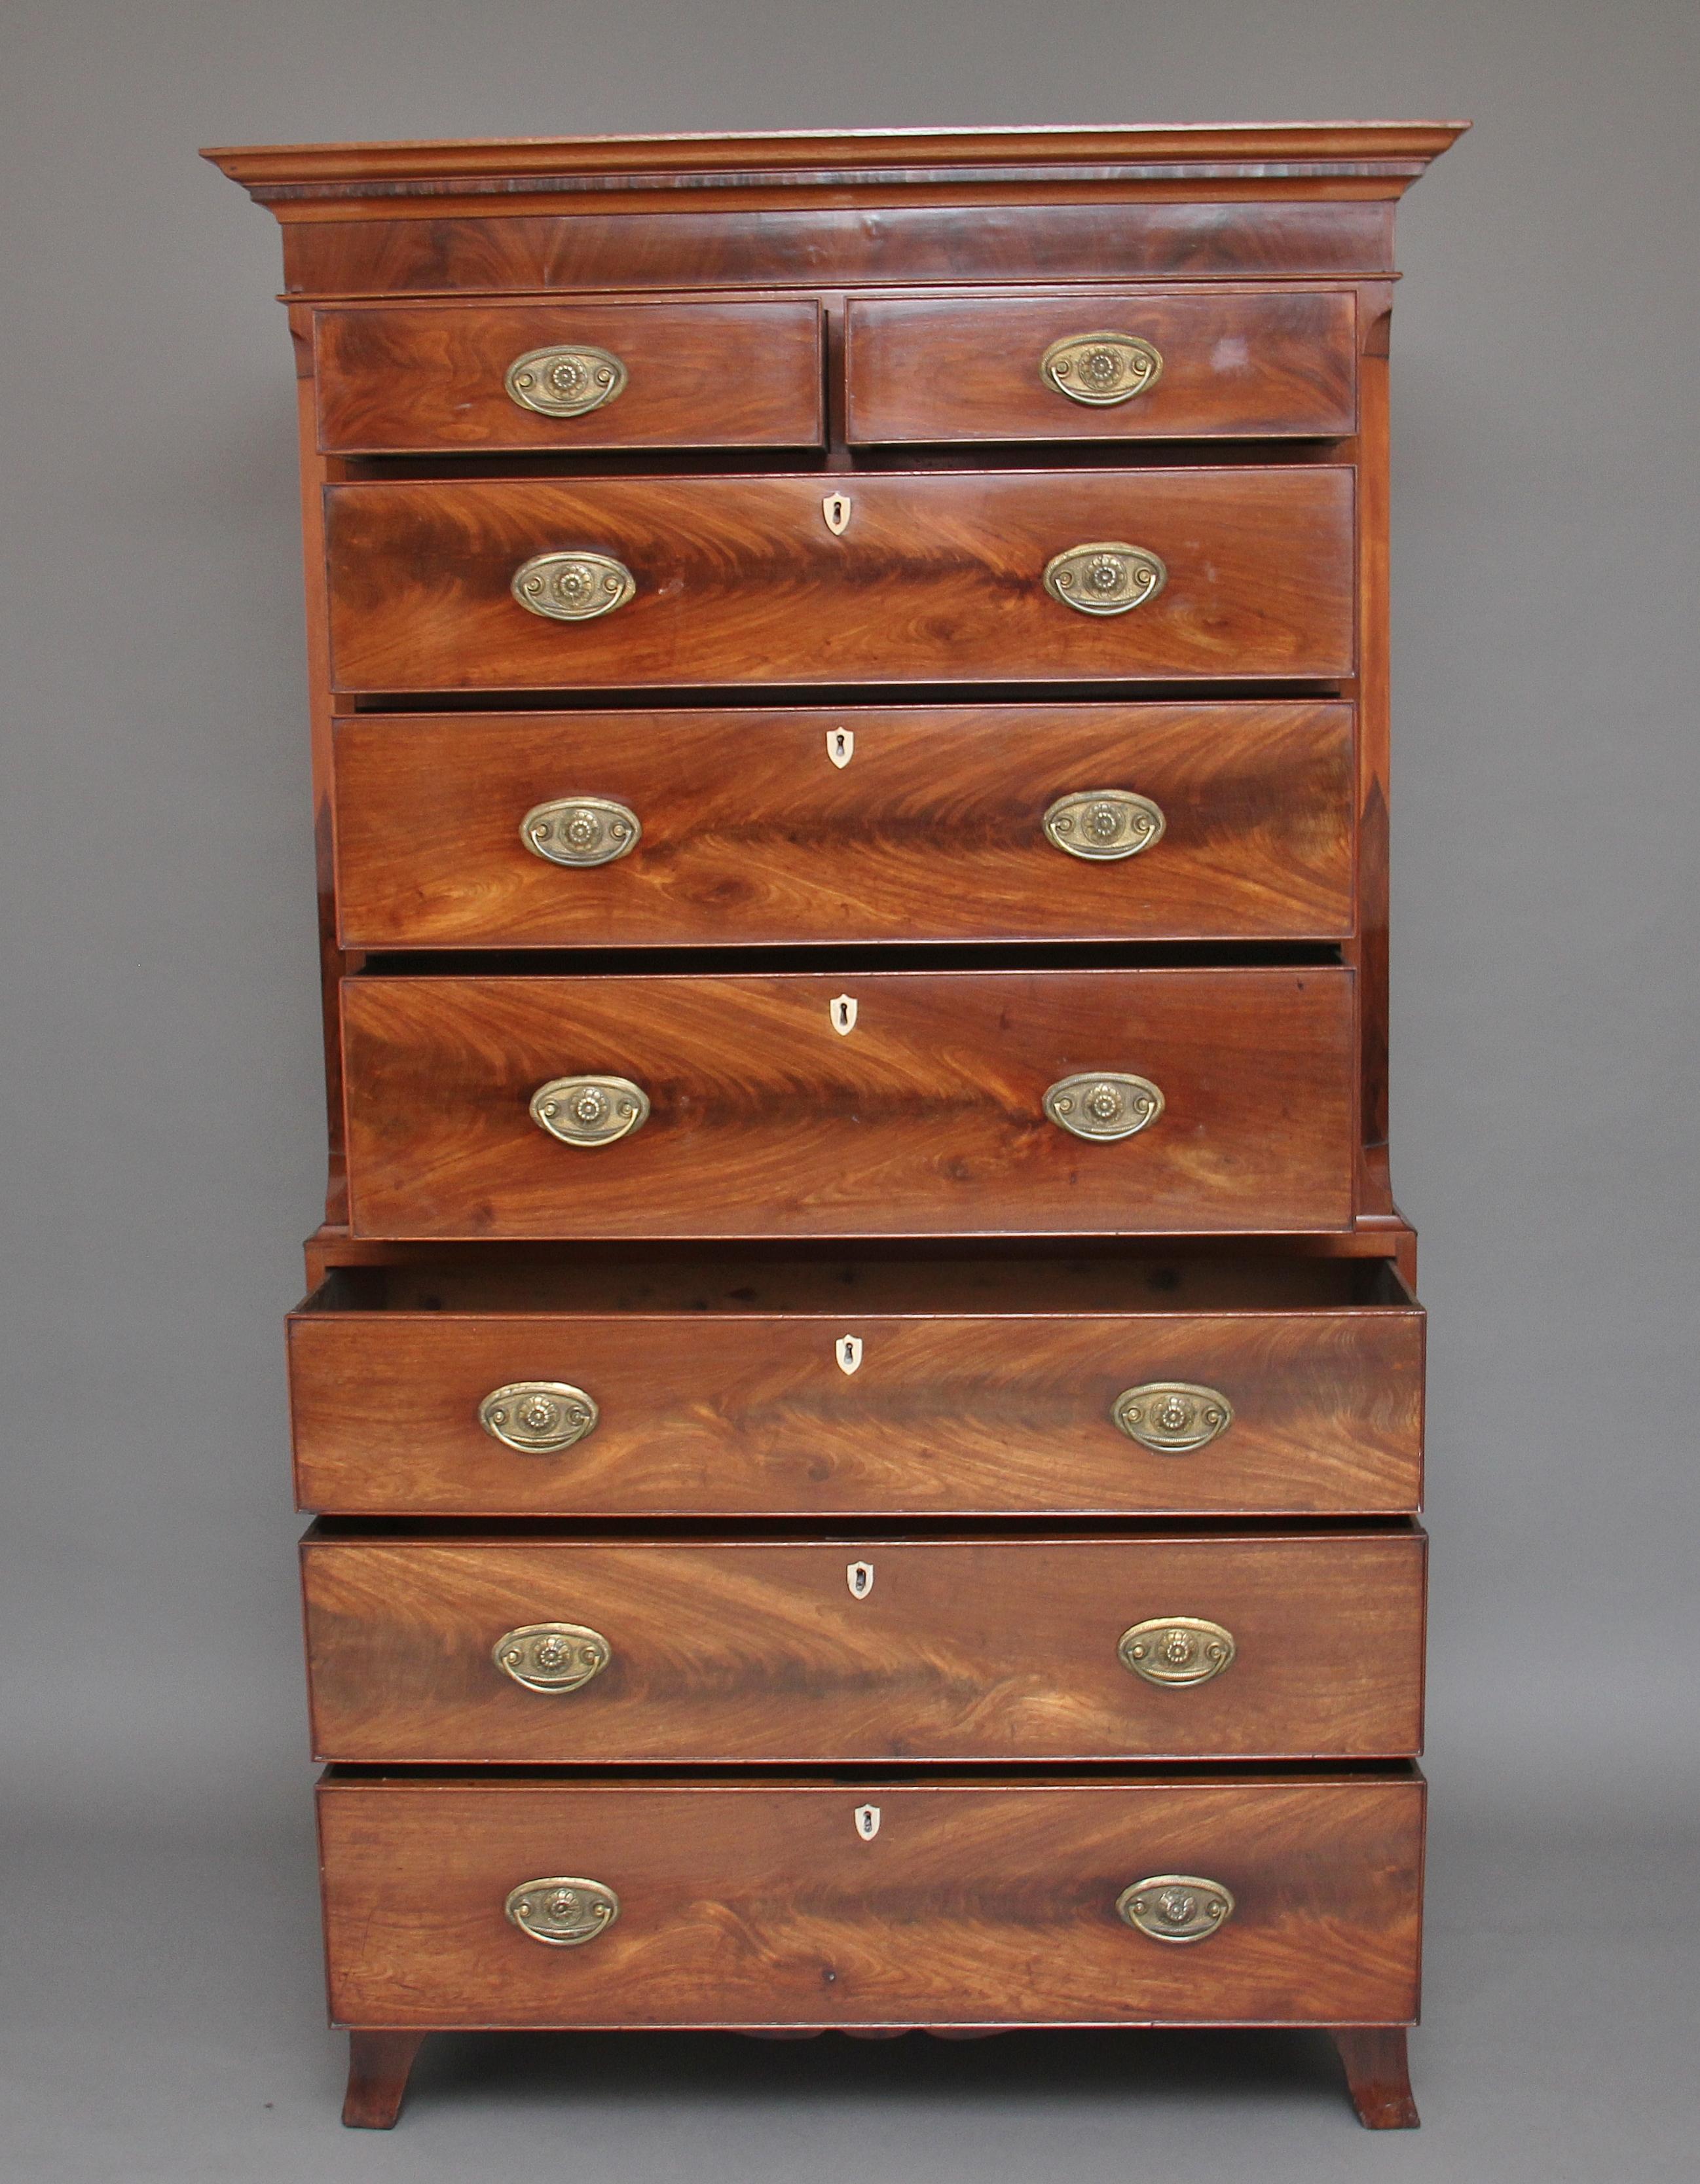 Early 19th century flame mahogany chest on chest, having a molded edge cornice above a selection of eight drawers, two short over six long graduated drawers, which are all oak lined and have original oval brass handles, the top section has canted